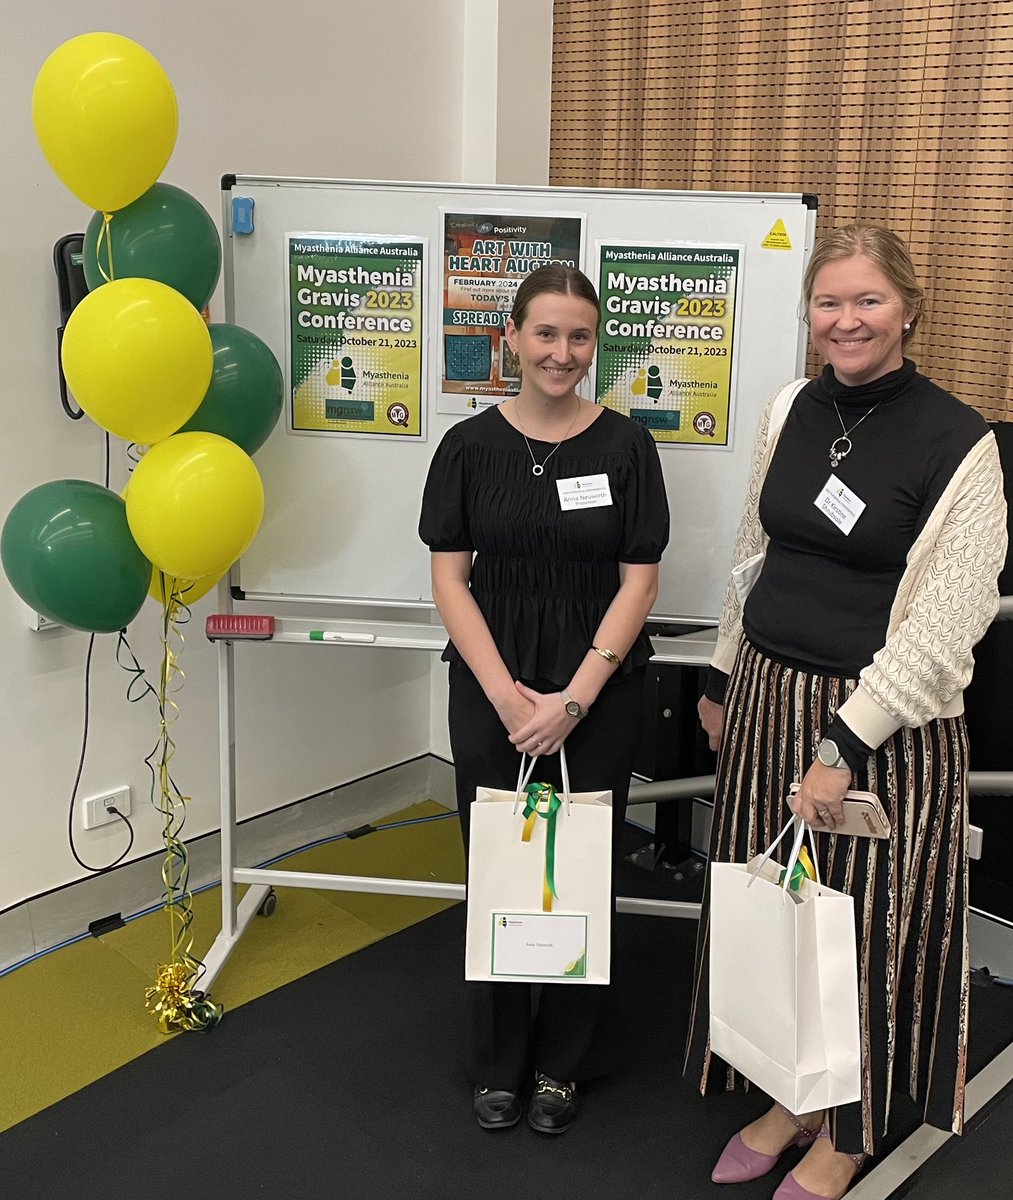 It was a privilege to present our research findings to the #myastheniagravis community at the MG consumer conference in Sydney. My lovely (ex) student Anna presented too and we flew the flag for #alliedhealth and #multidisciplinary care for MG